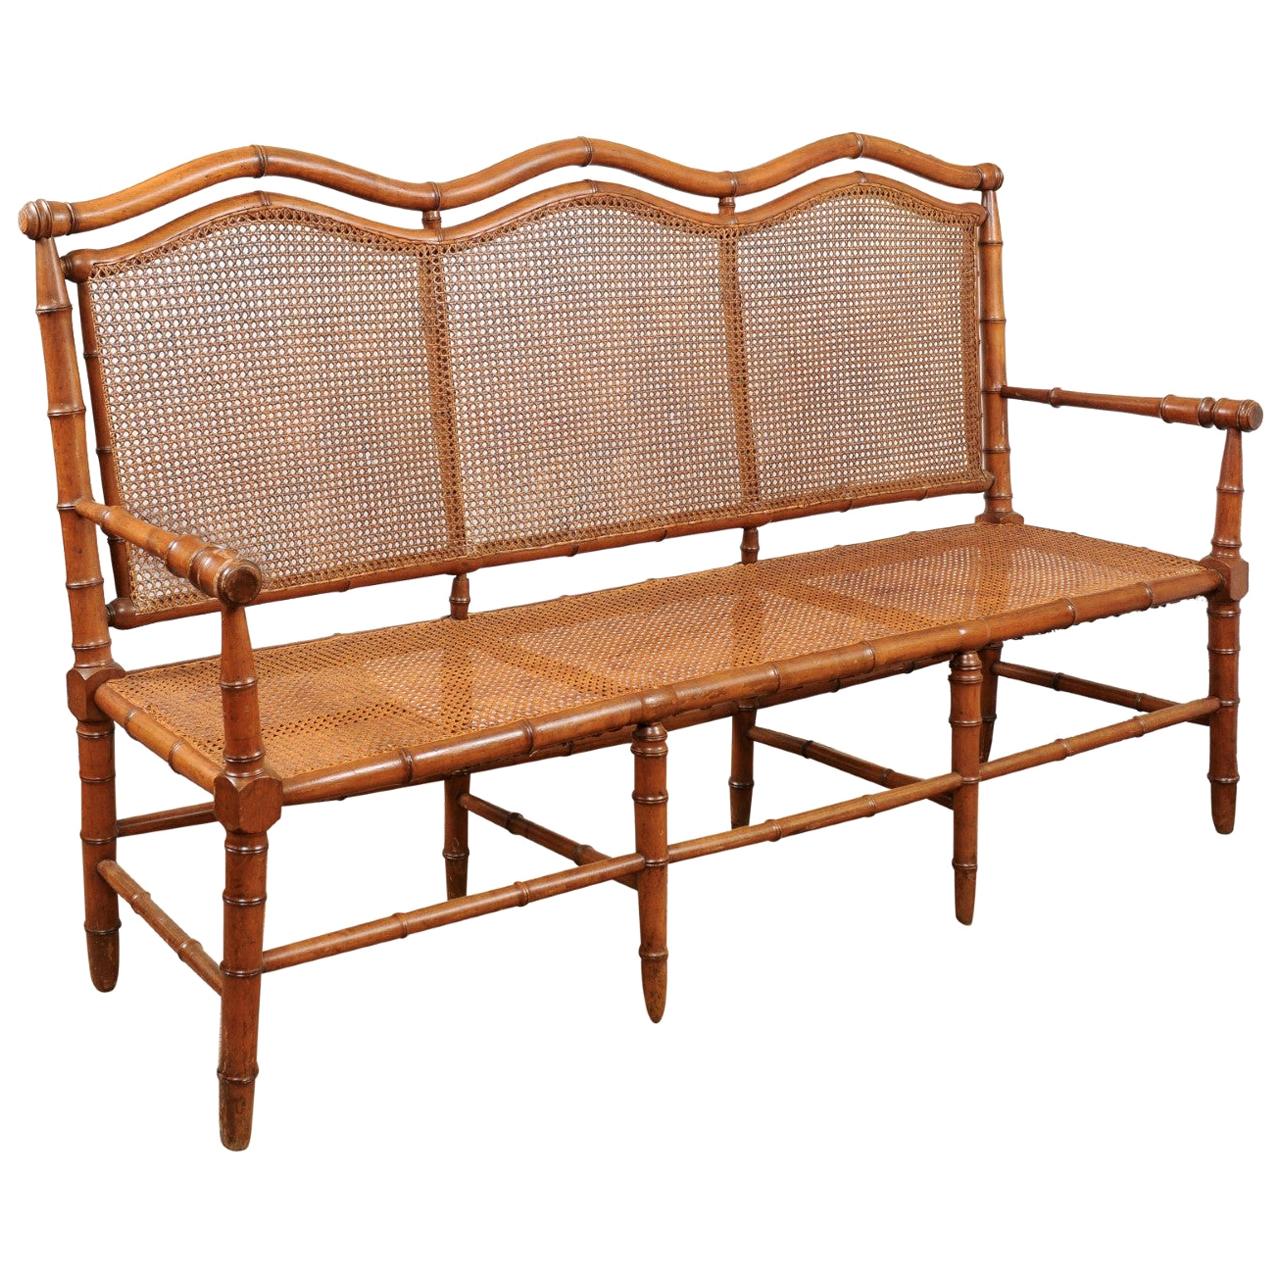 French Bamboo Style Beechwood Caned Bench, circa 1880